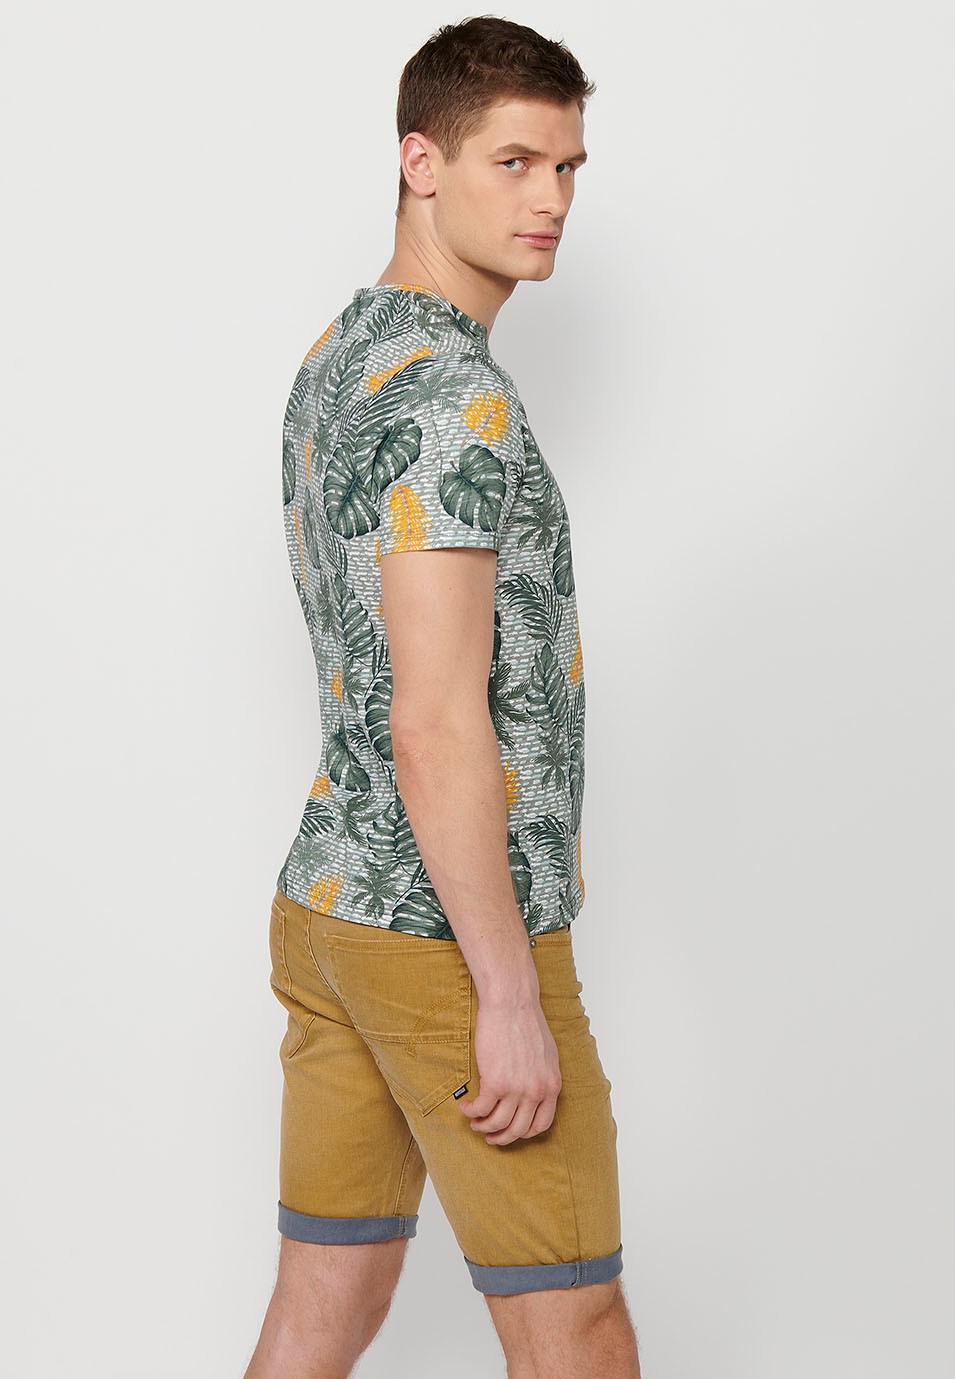 Short-sleeved cotton t-shirt with multicolored tropical print for men